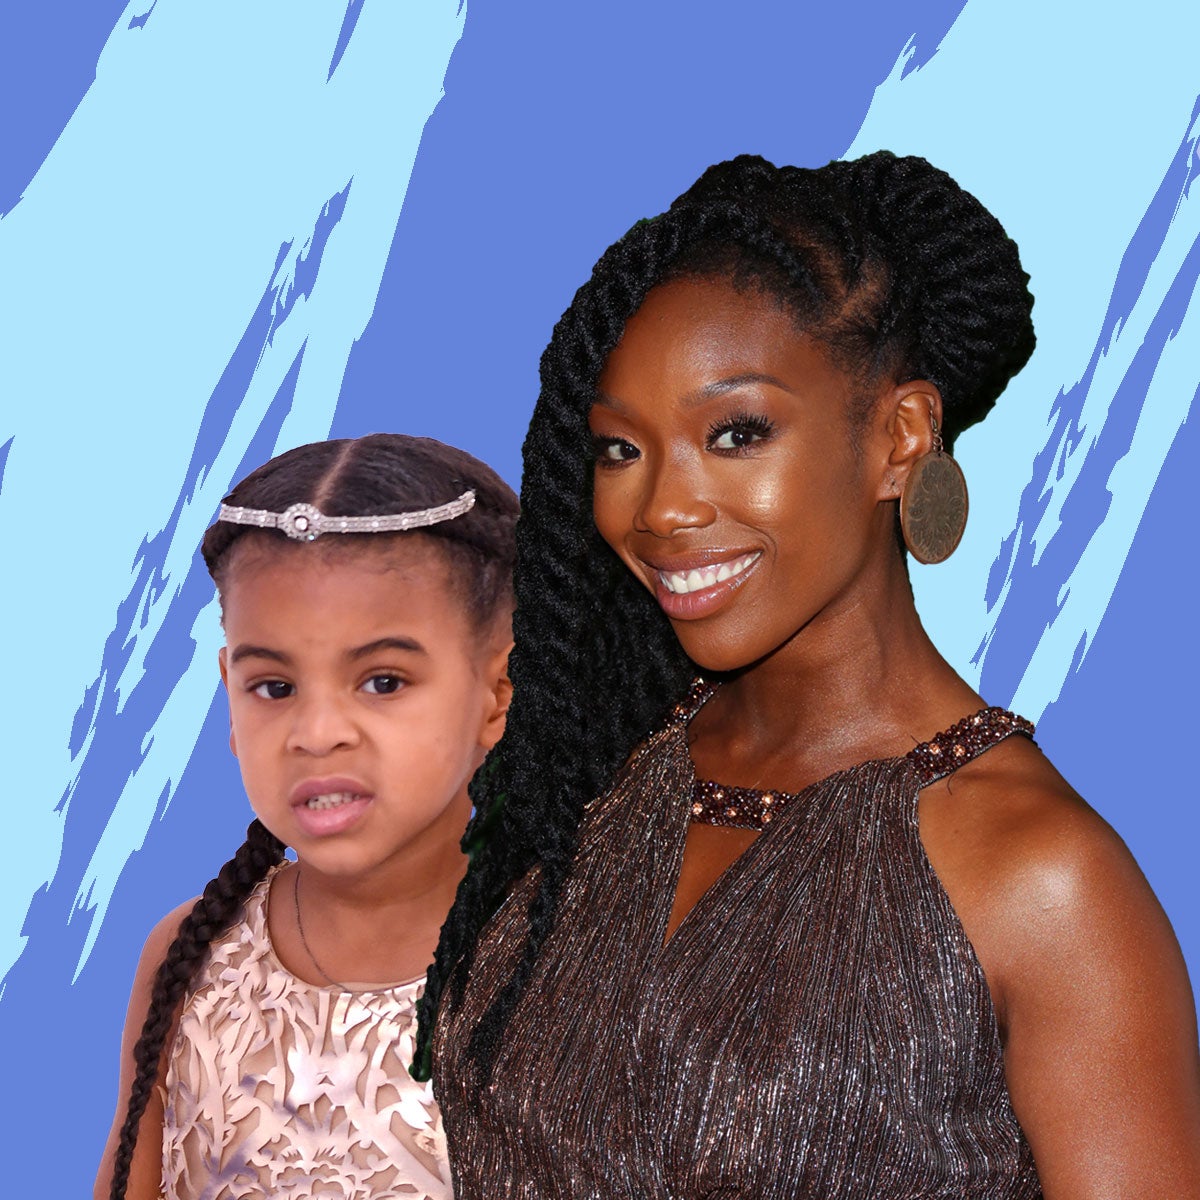 Watch 'Set Trippin' To Hear Brandy's Big Plan To Save (Or Kidnap) Blue Ivy